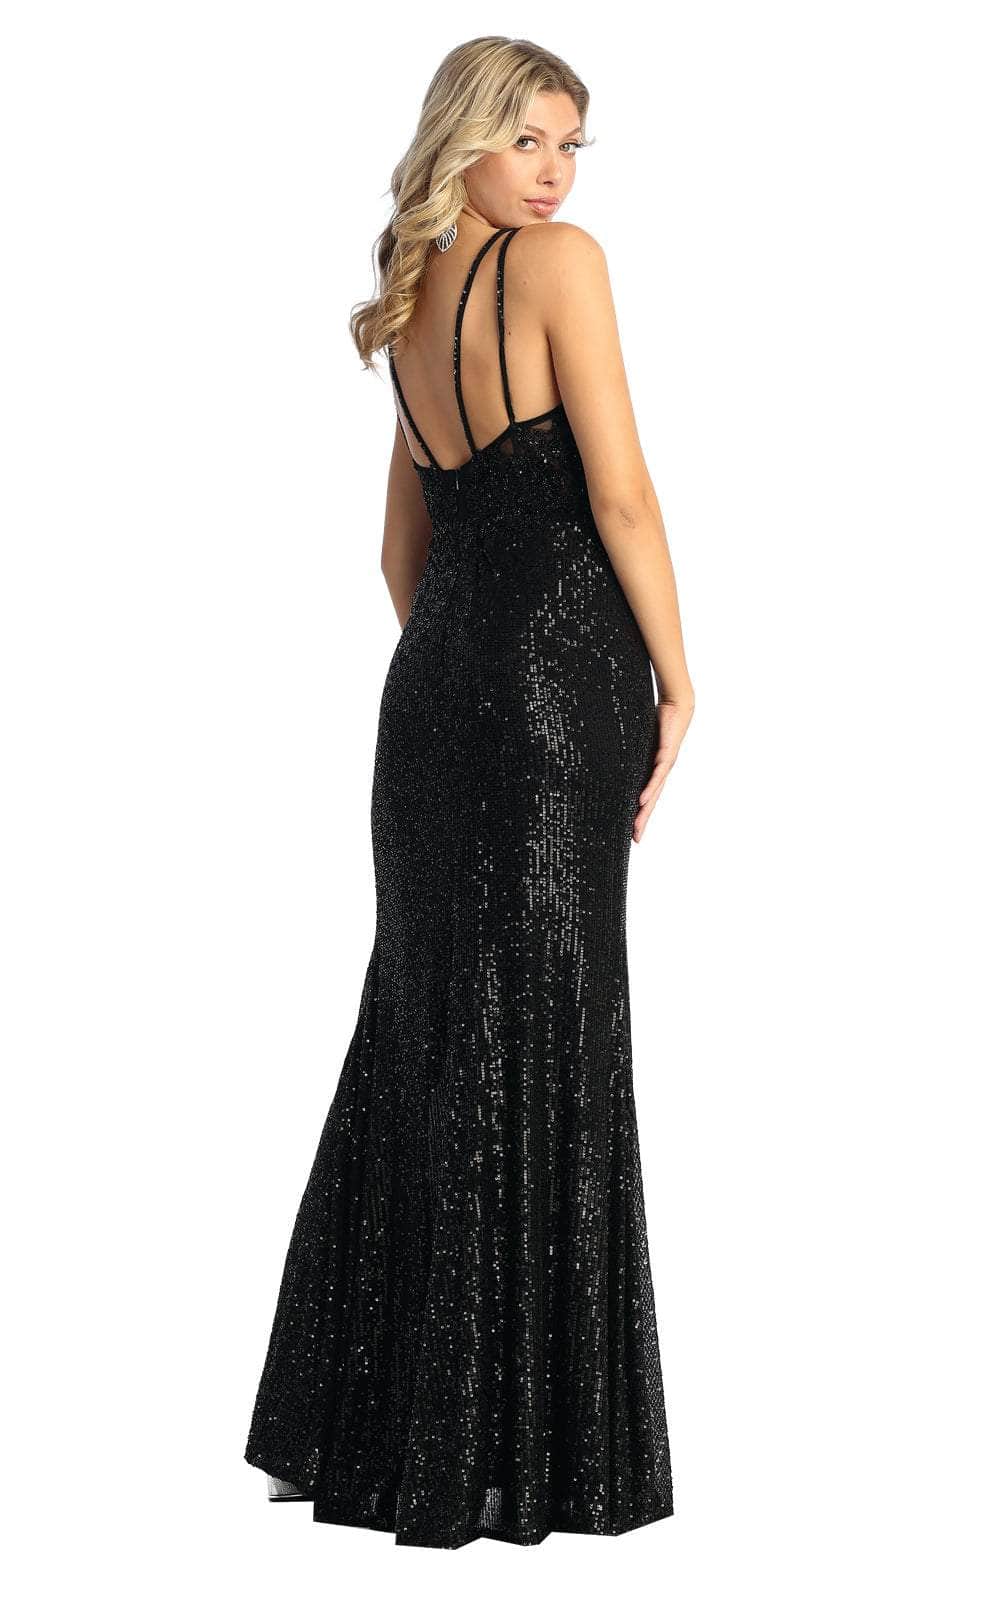 May Queen RQ7940 - Sequined V-Neck Evening Dress Special Occasion Dress